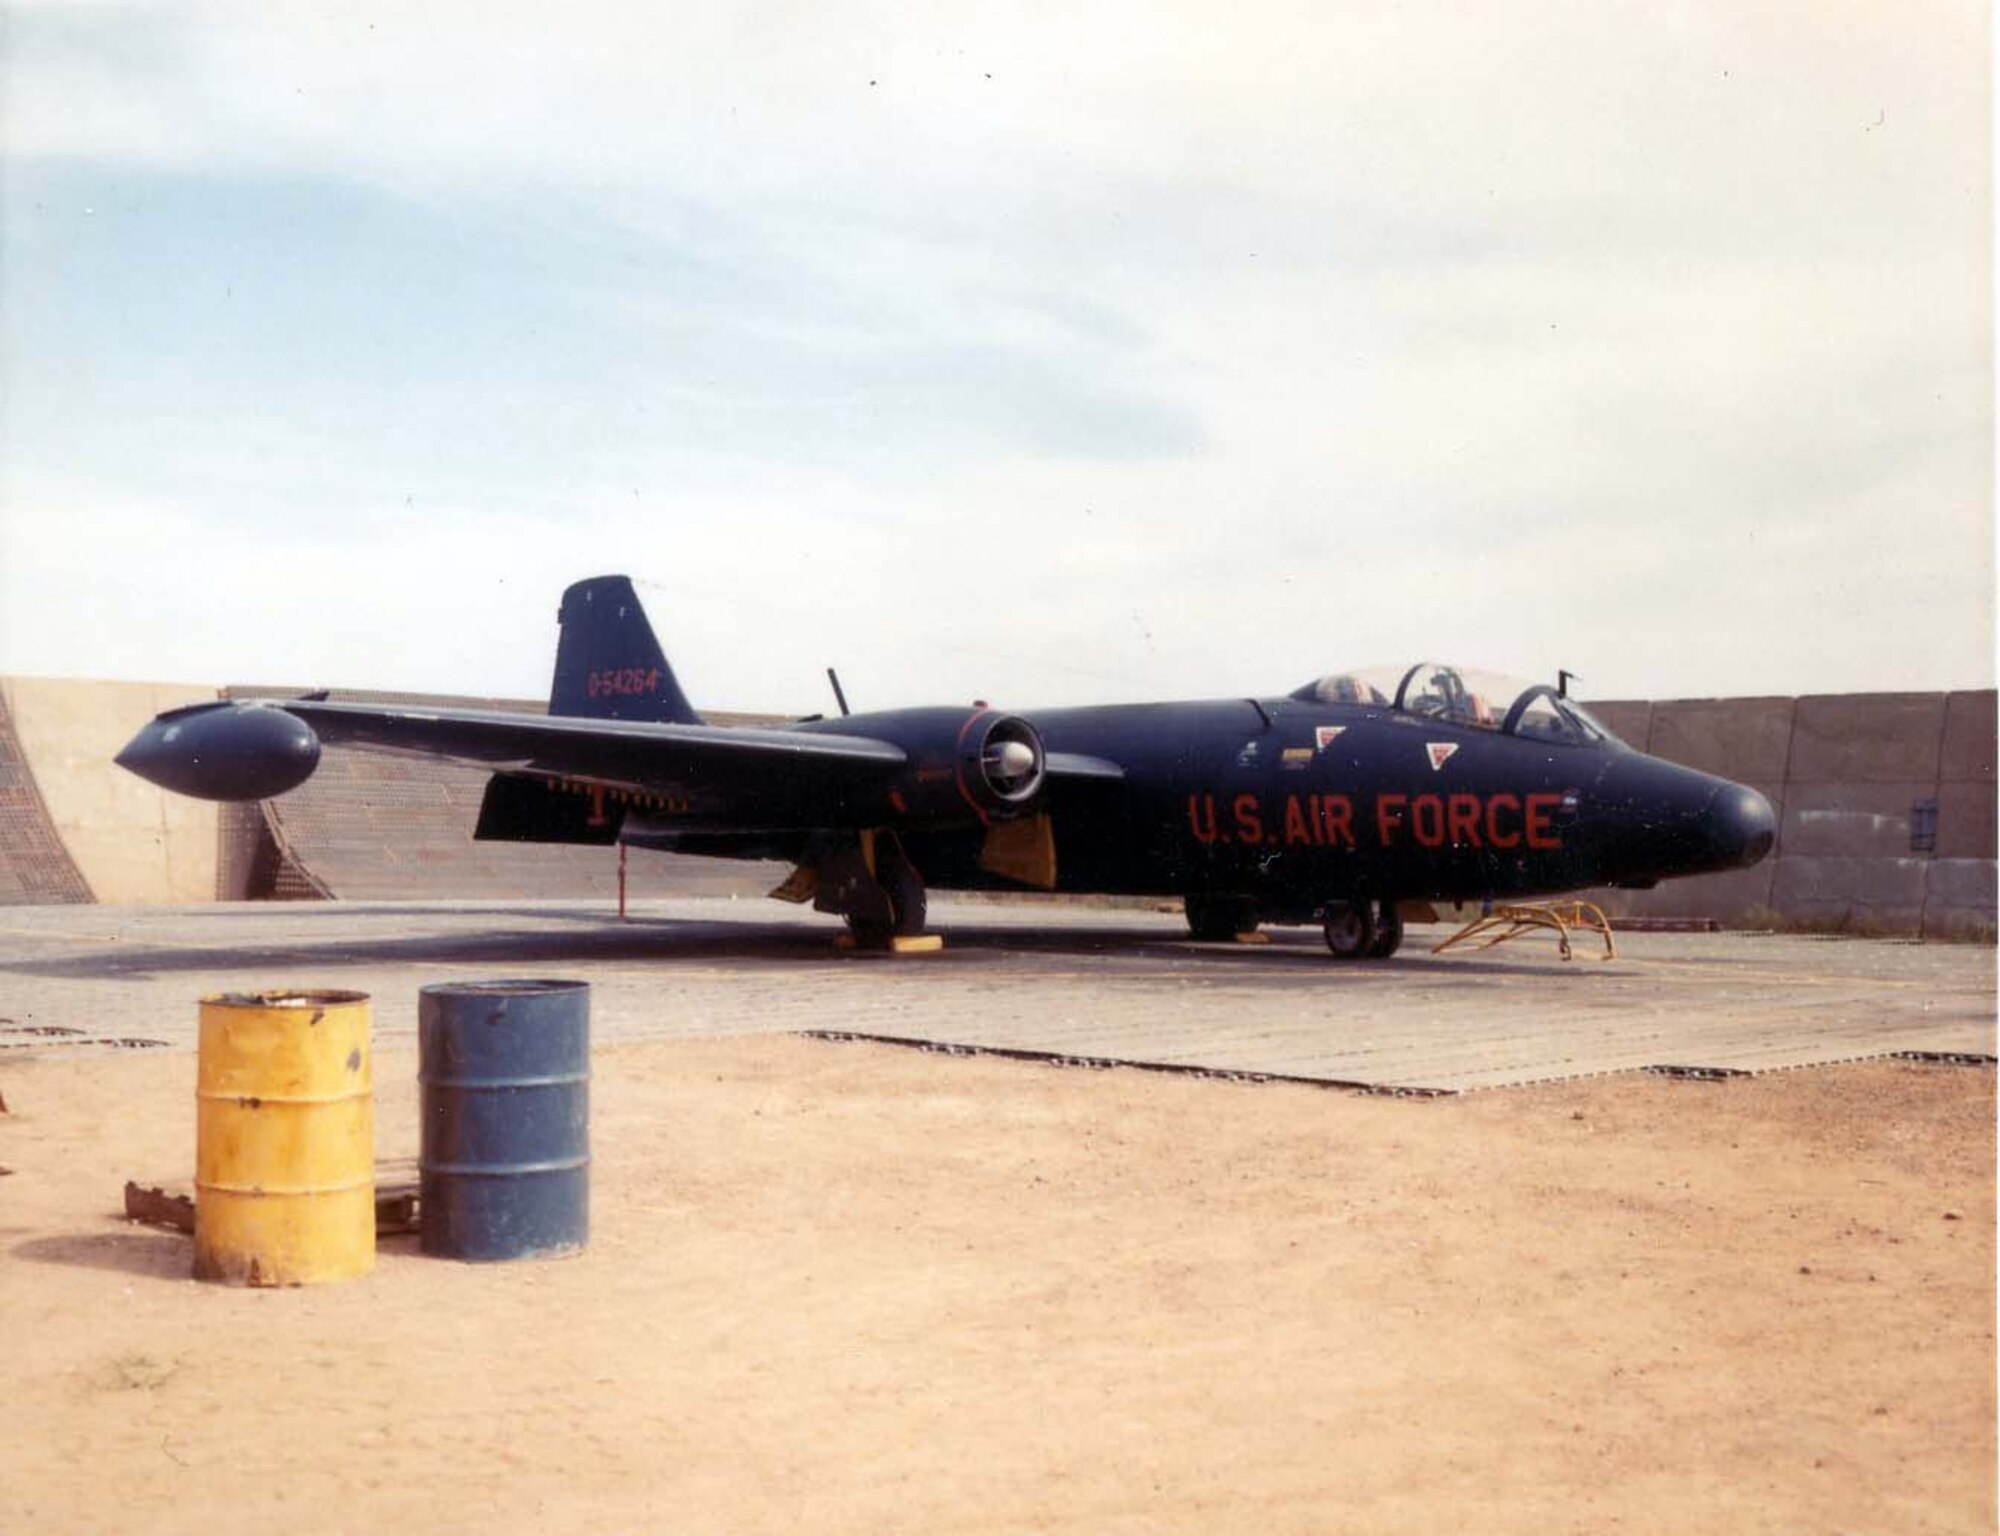 Martin RB-57E "Patricia Lynn" 3/4 front view at Da Nang AB, South Vietnam, in January 1964. Aircraft was originally B-57E (S/N 55-4264). This aircraft was lost on Oct. 25, 1968. (U.S. Air Force photo)